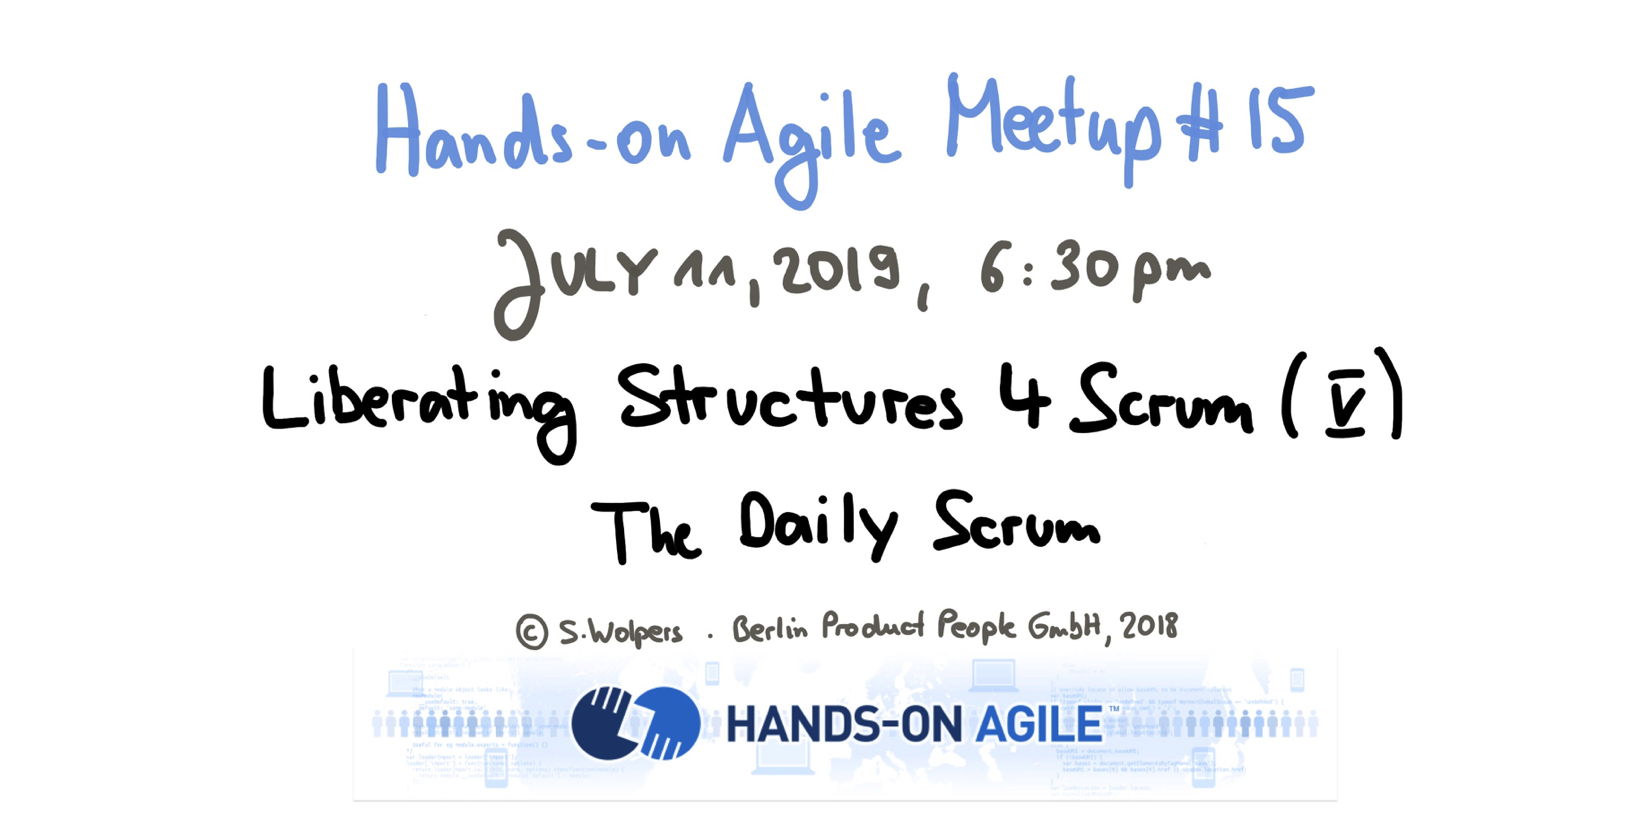 Hands-on Agile Meetup Berlin: Liberating Structures Daily Scrum